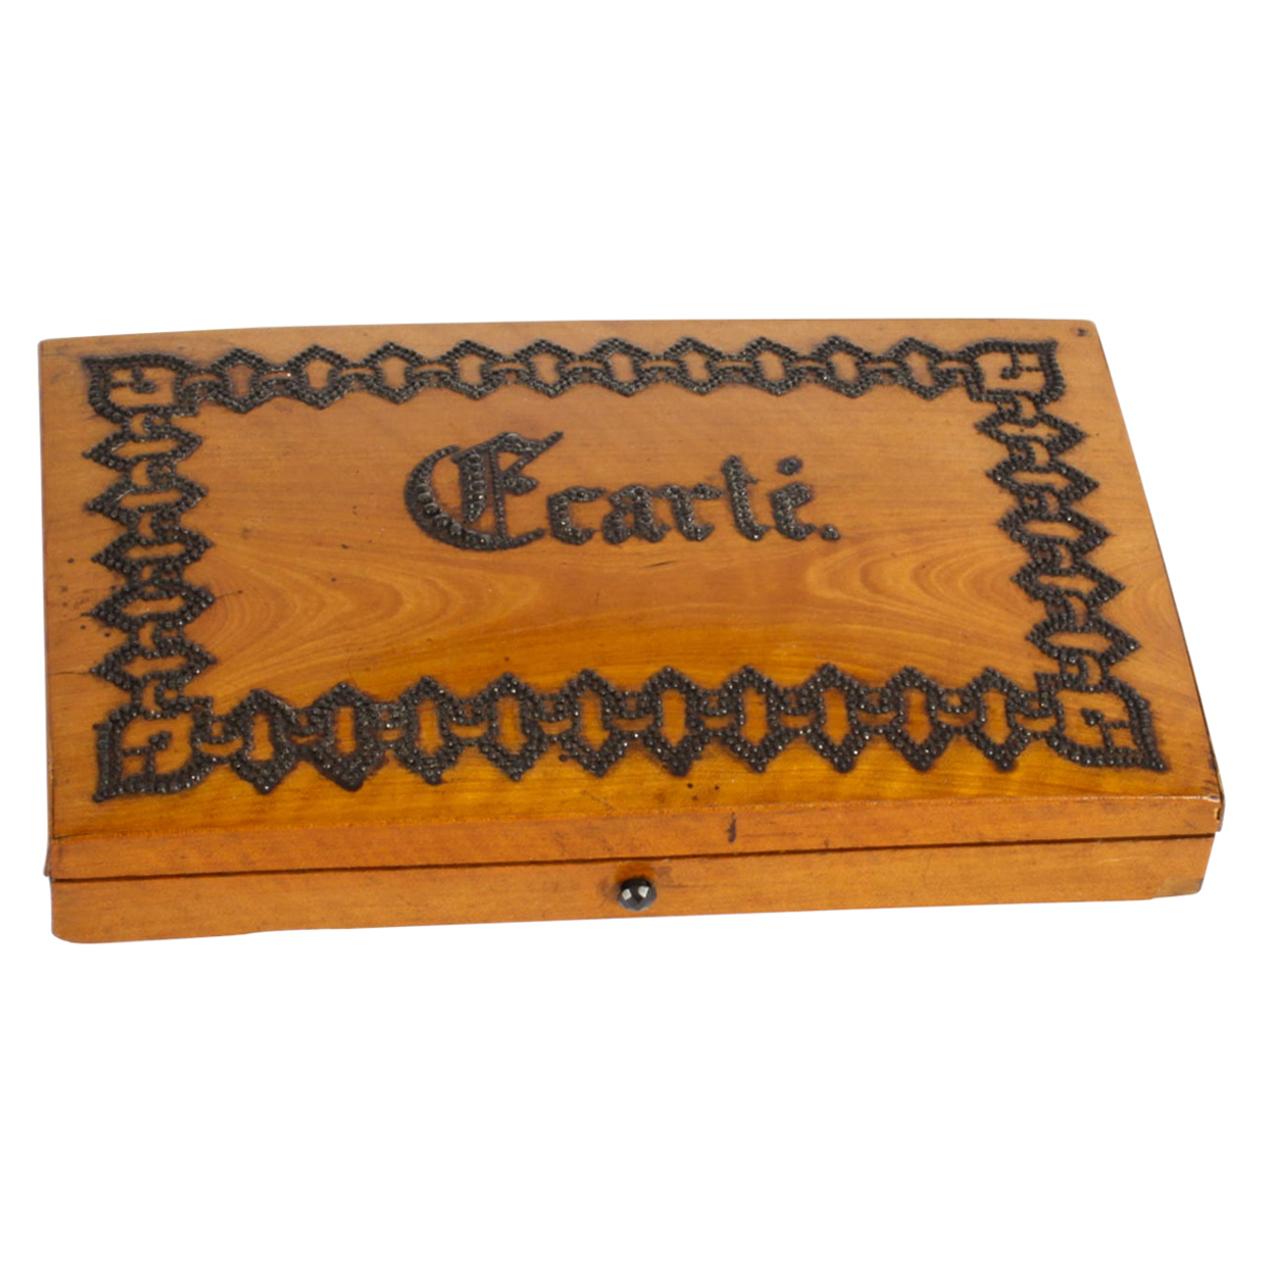 Antique French Satinwood Ecarte Playing Card Box, 19th Century